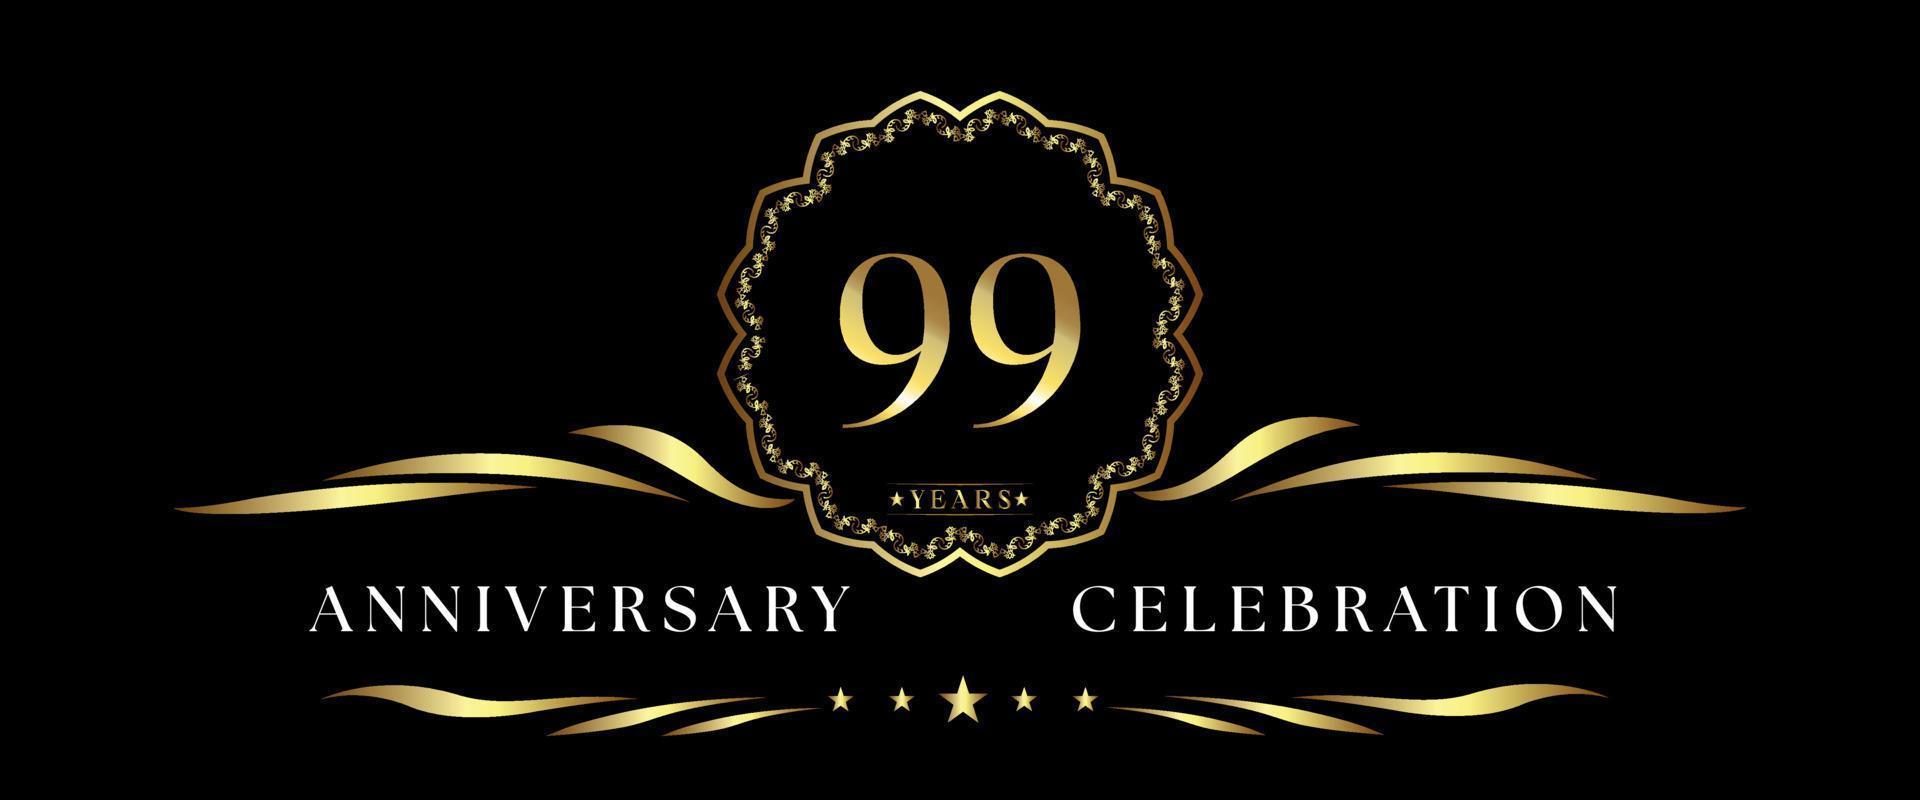 99 years anniversary celebration with gold decorative frame isolated on black background. Vector design for greeting card, birthday party, wedding, event party, ceremony. 99 years Anniversary logo.